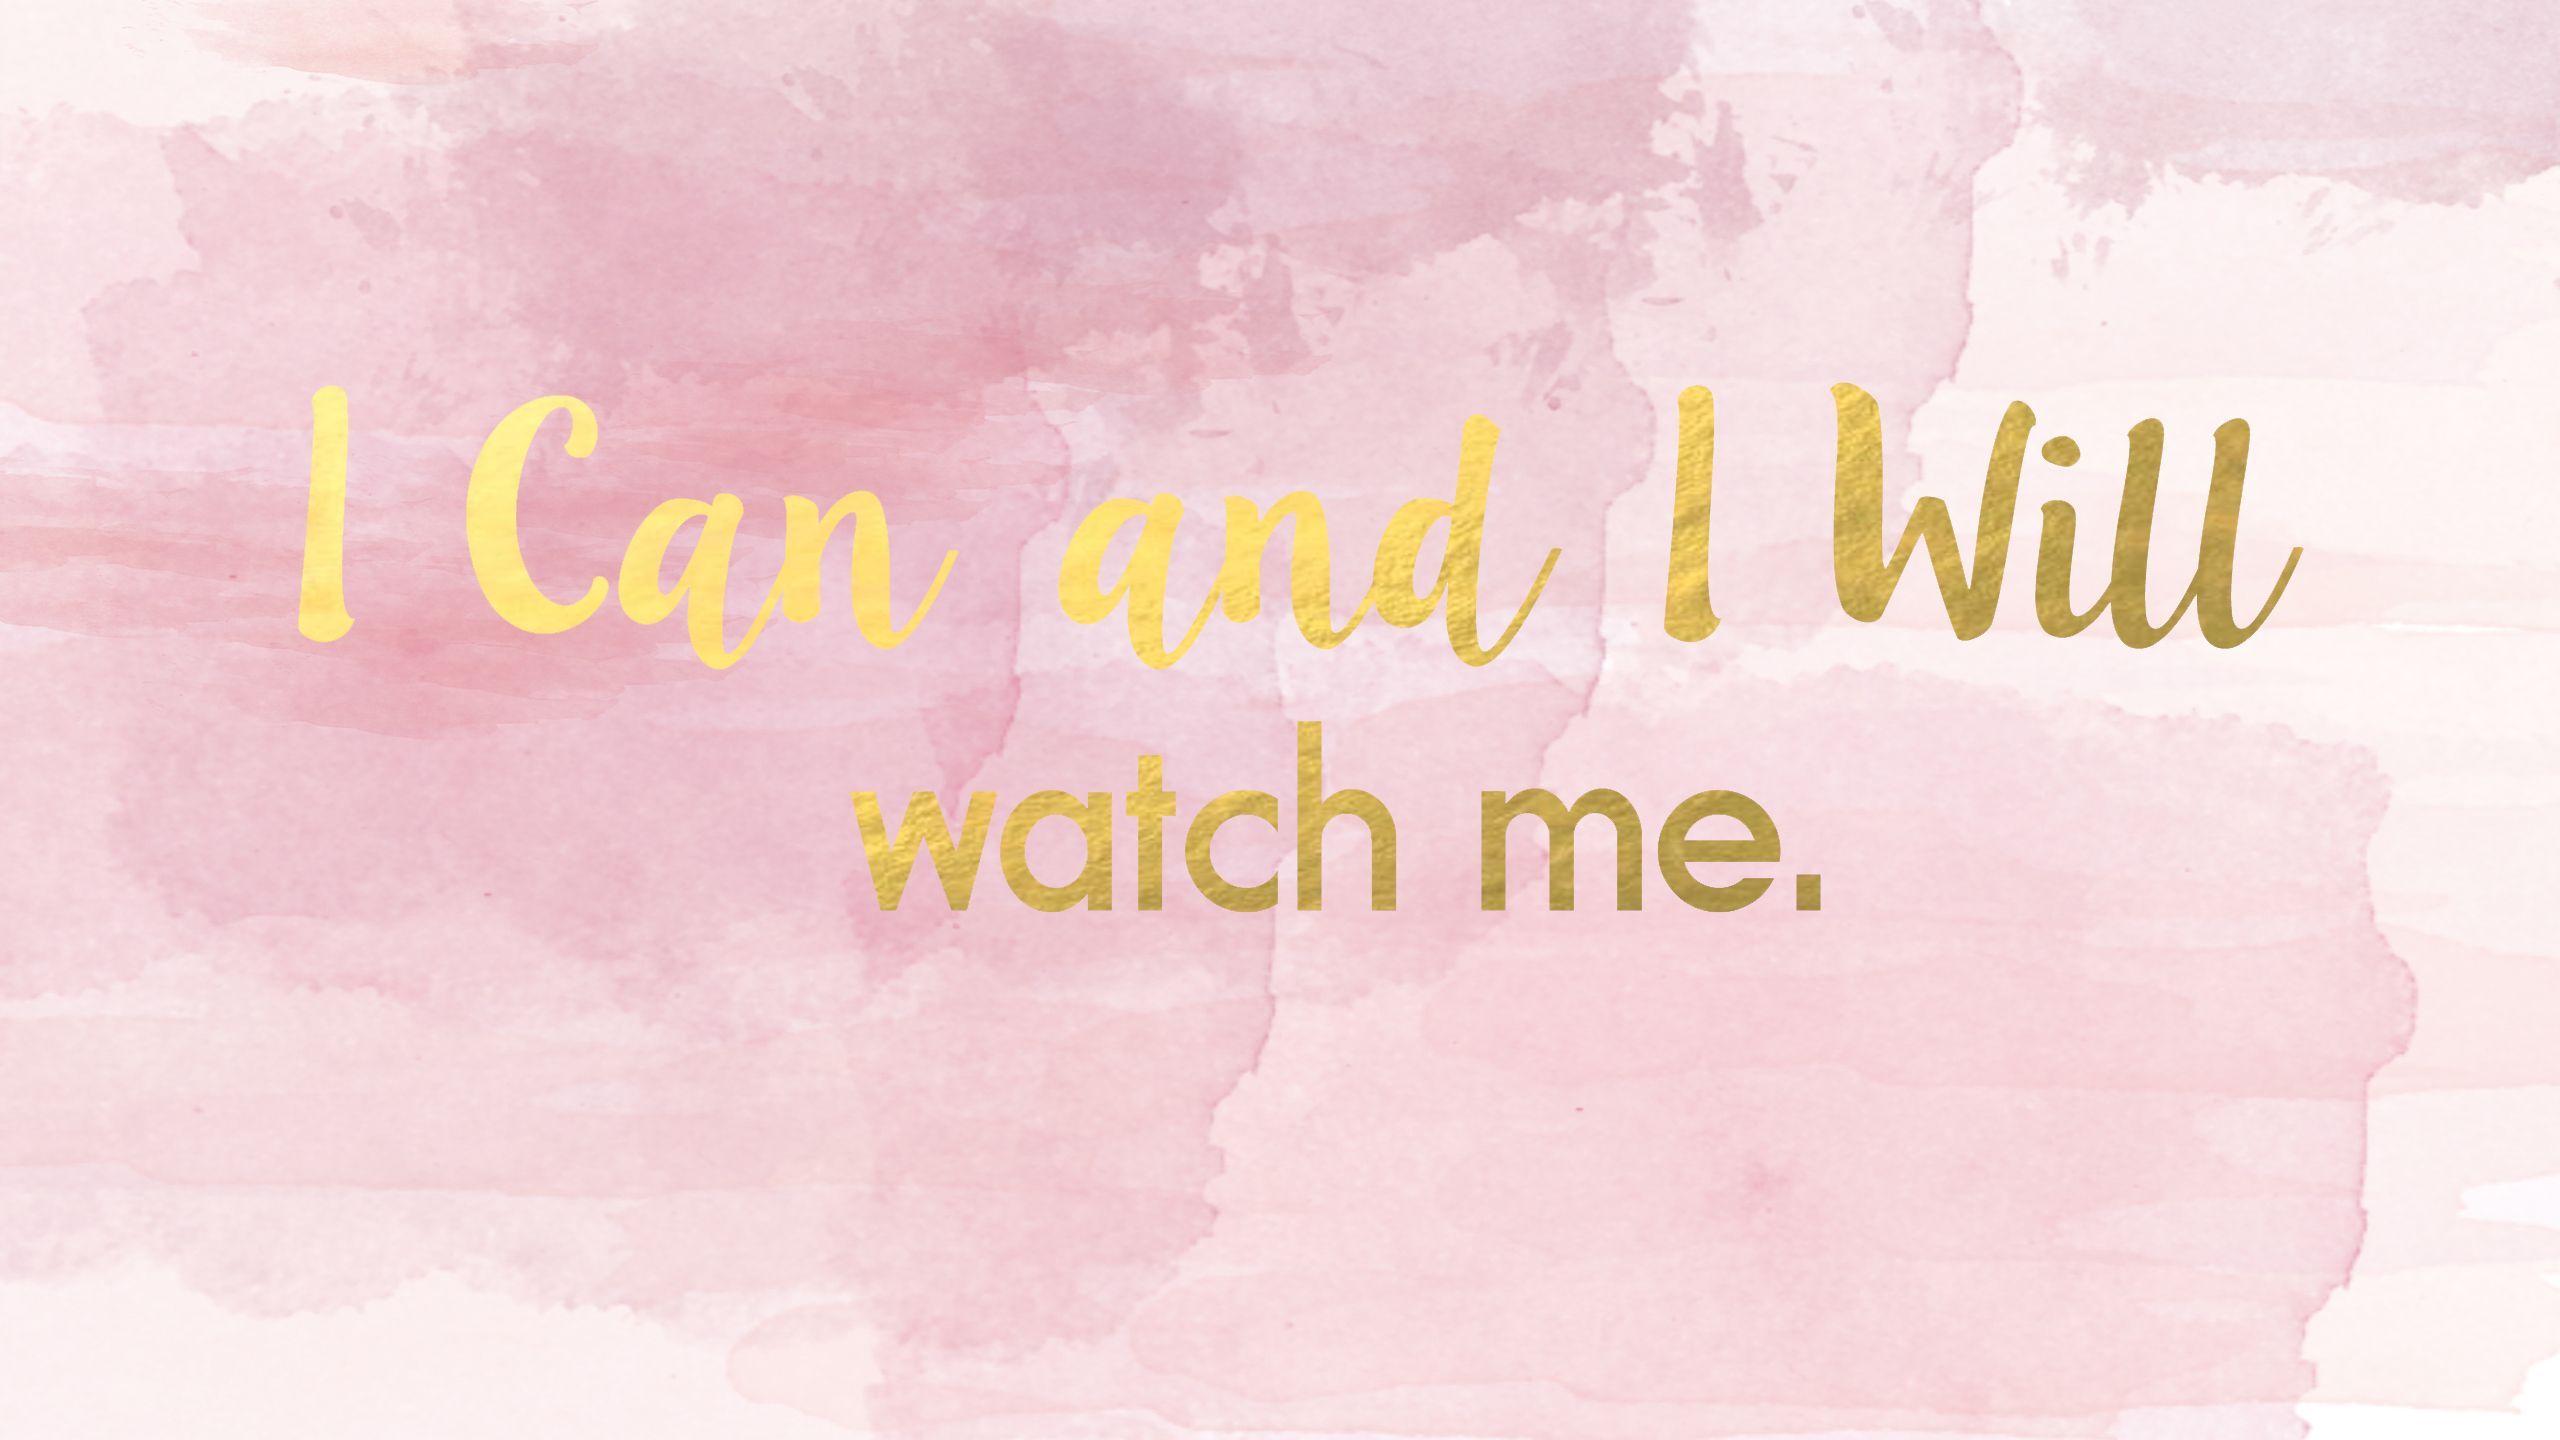 I Can And I Will desktop wallpaper pink pastel and gold. Pink wallpaper desktop, Mac wallpaper desktop, Aesthetic desktop wallpaper